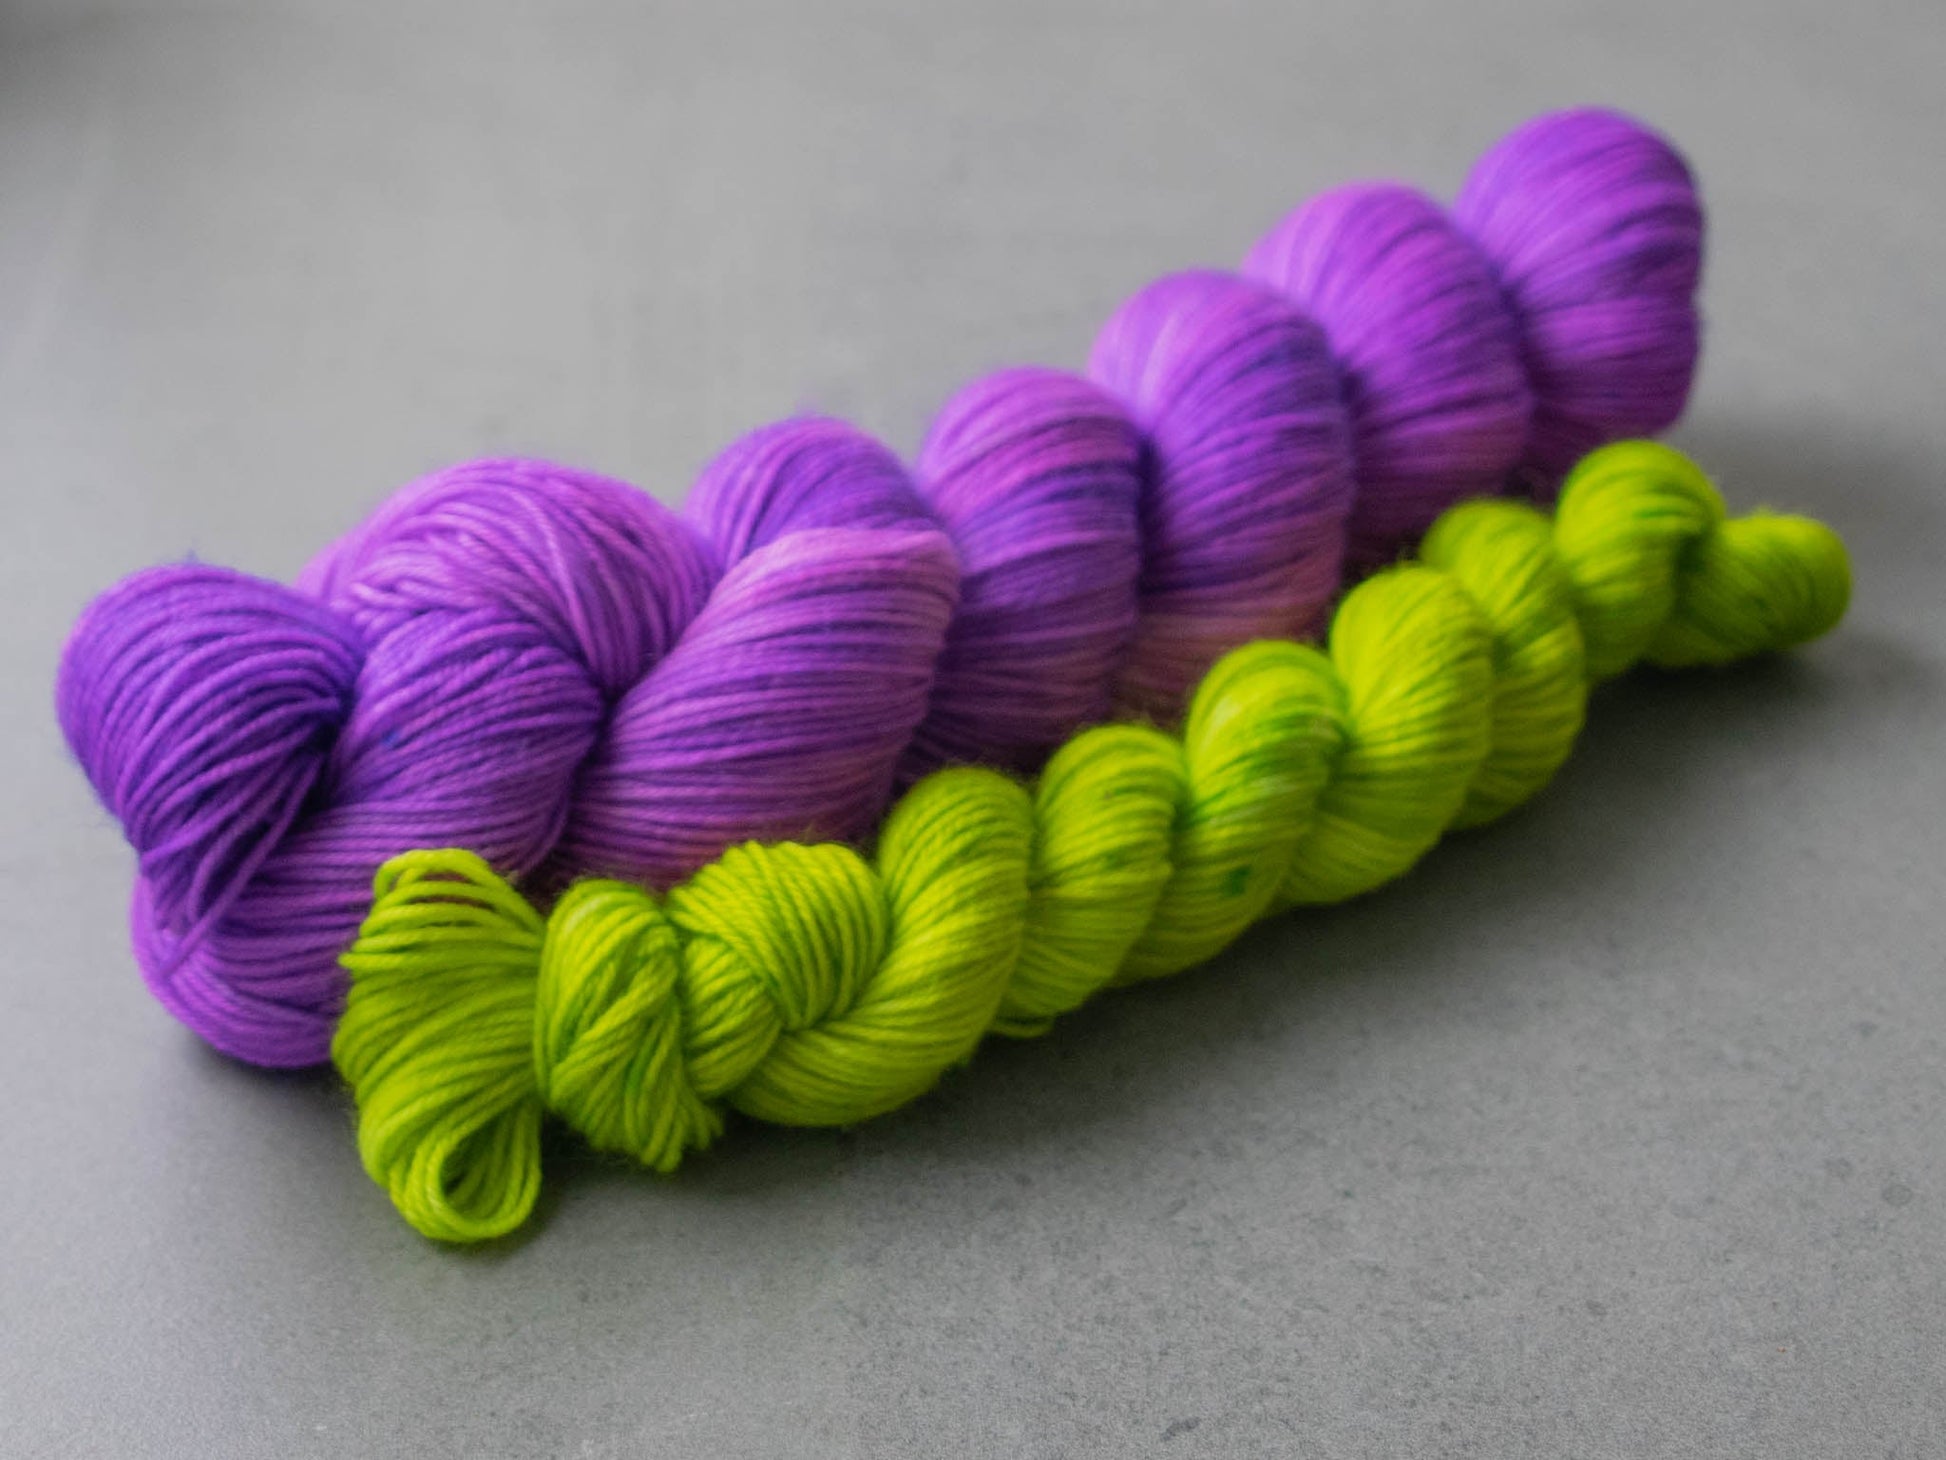 Full view of a large skein of purple Merino wool and a mini skein of electric green.